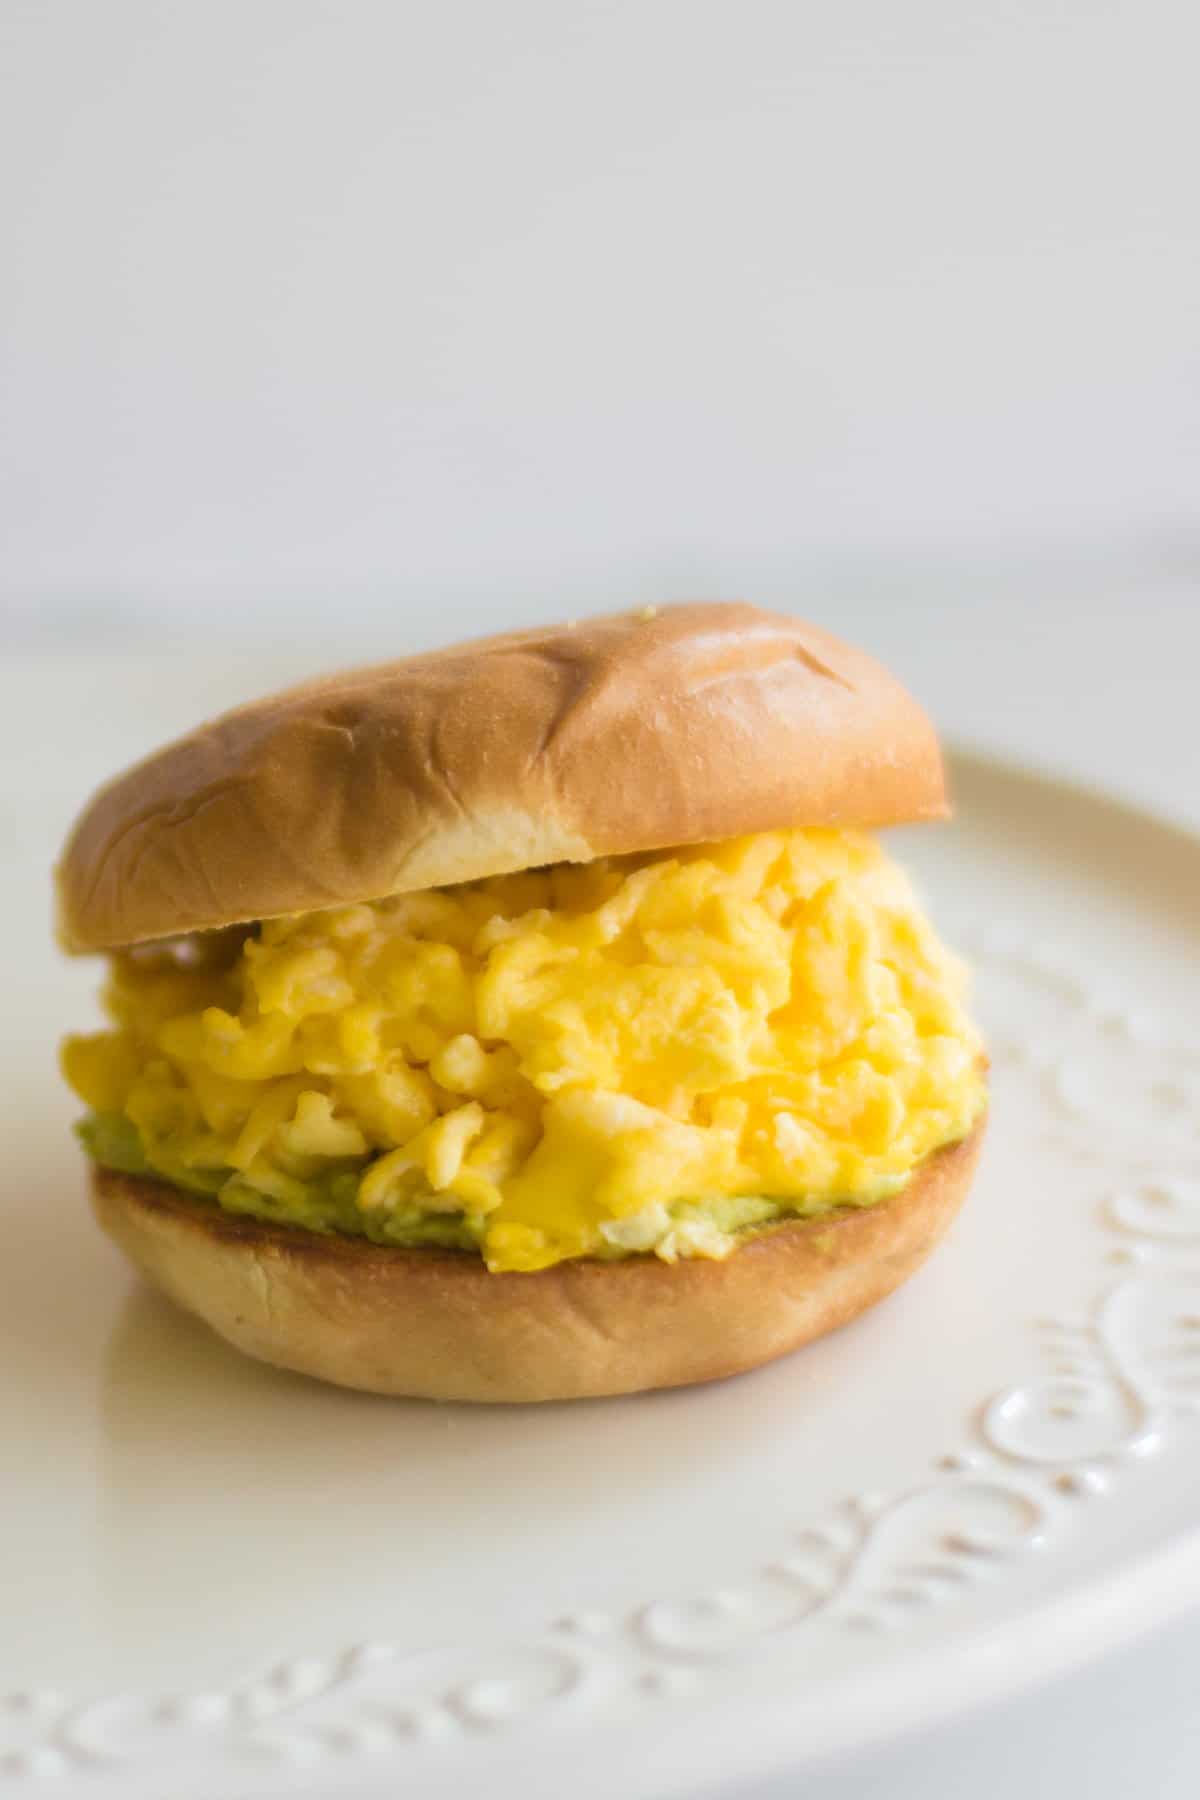 Scrambled eggs piled high between two slices of bread.